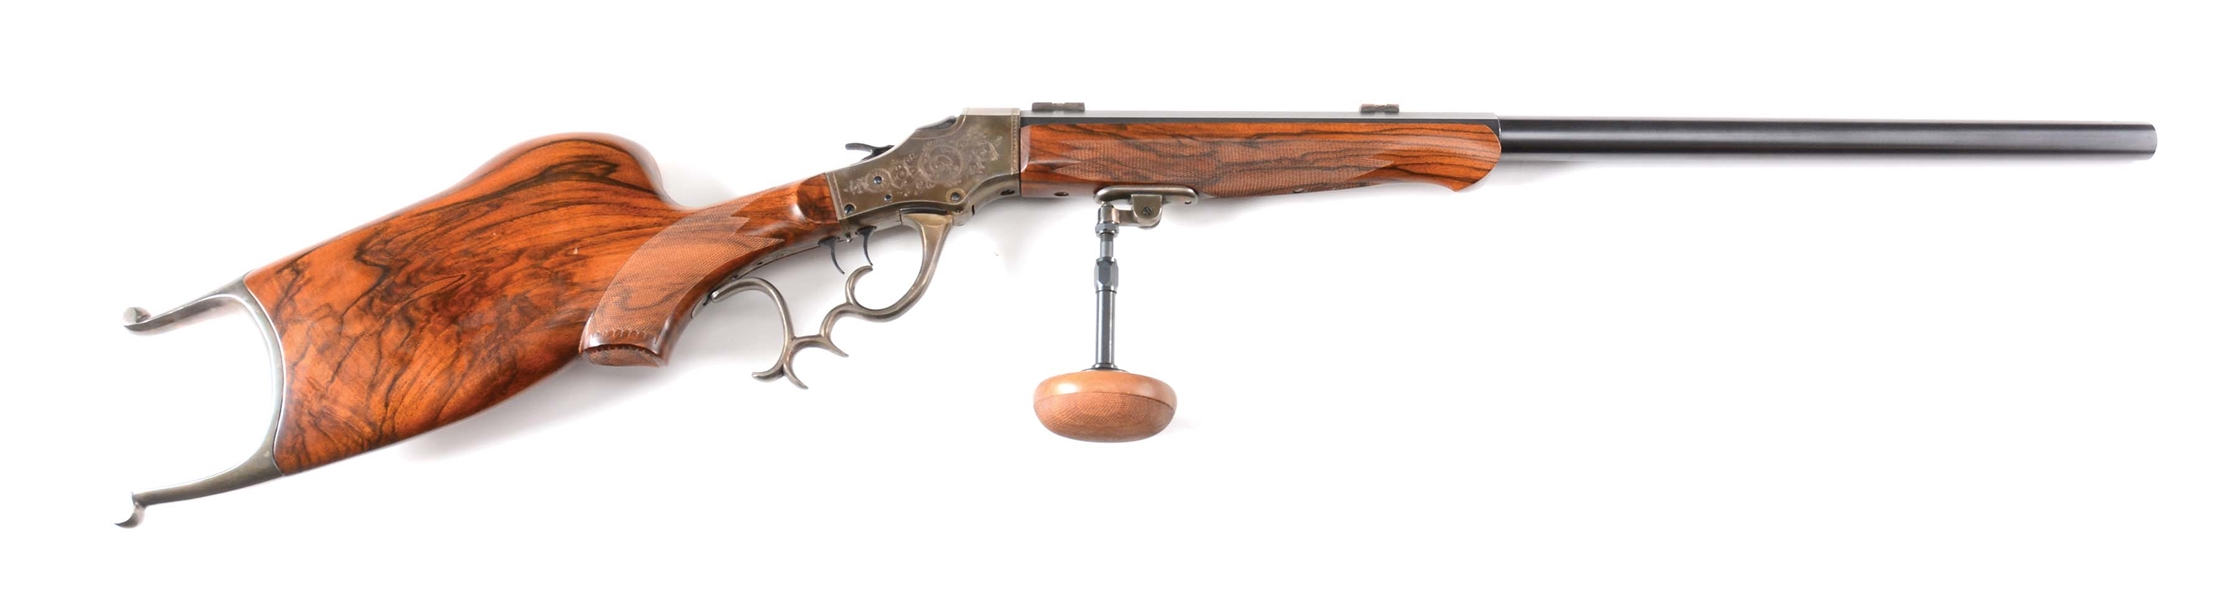 (M) STEVENS CPA REPRODUCTION BY PAUL SHUTTLEWORTH SINGLE SHOT RIFLE.